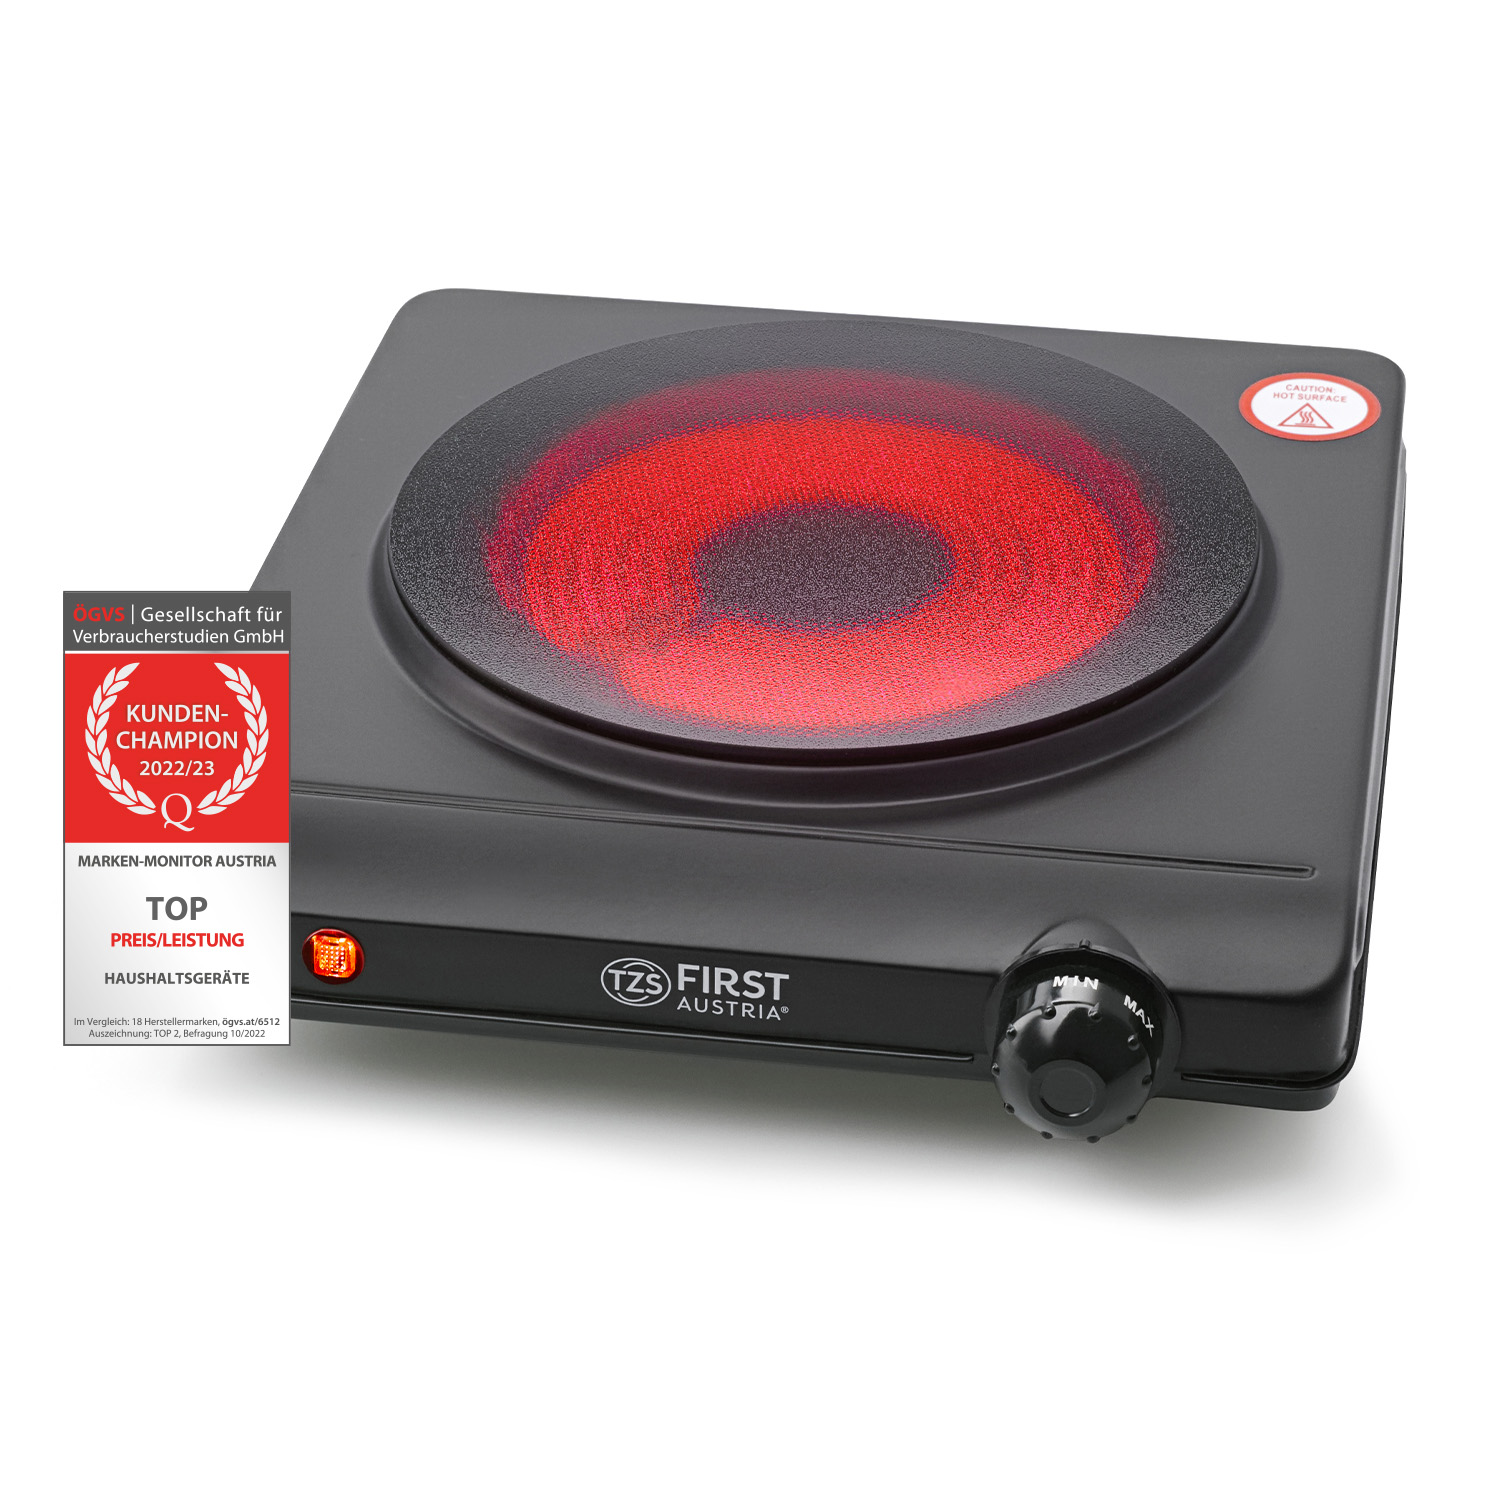 Infrared hotplate | single or double